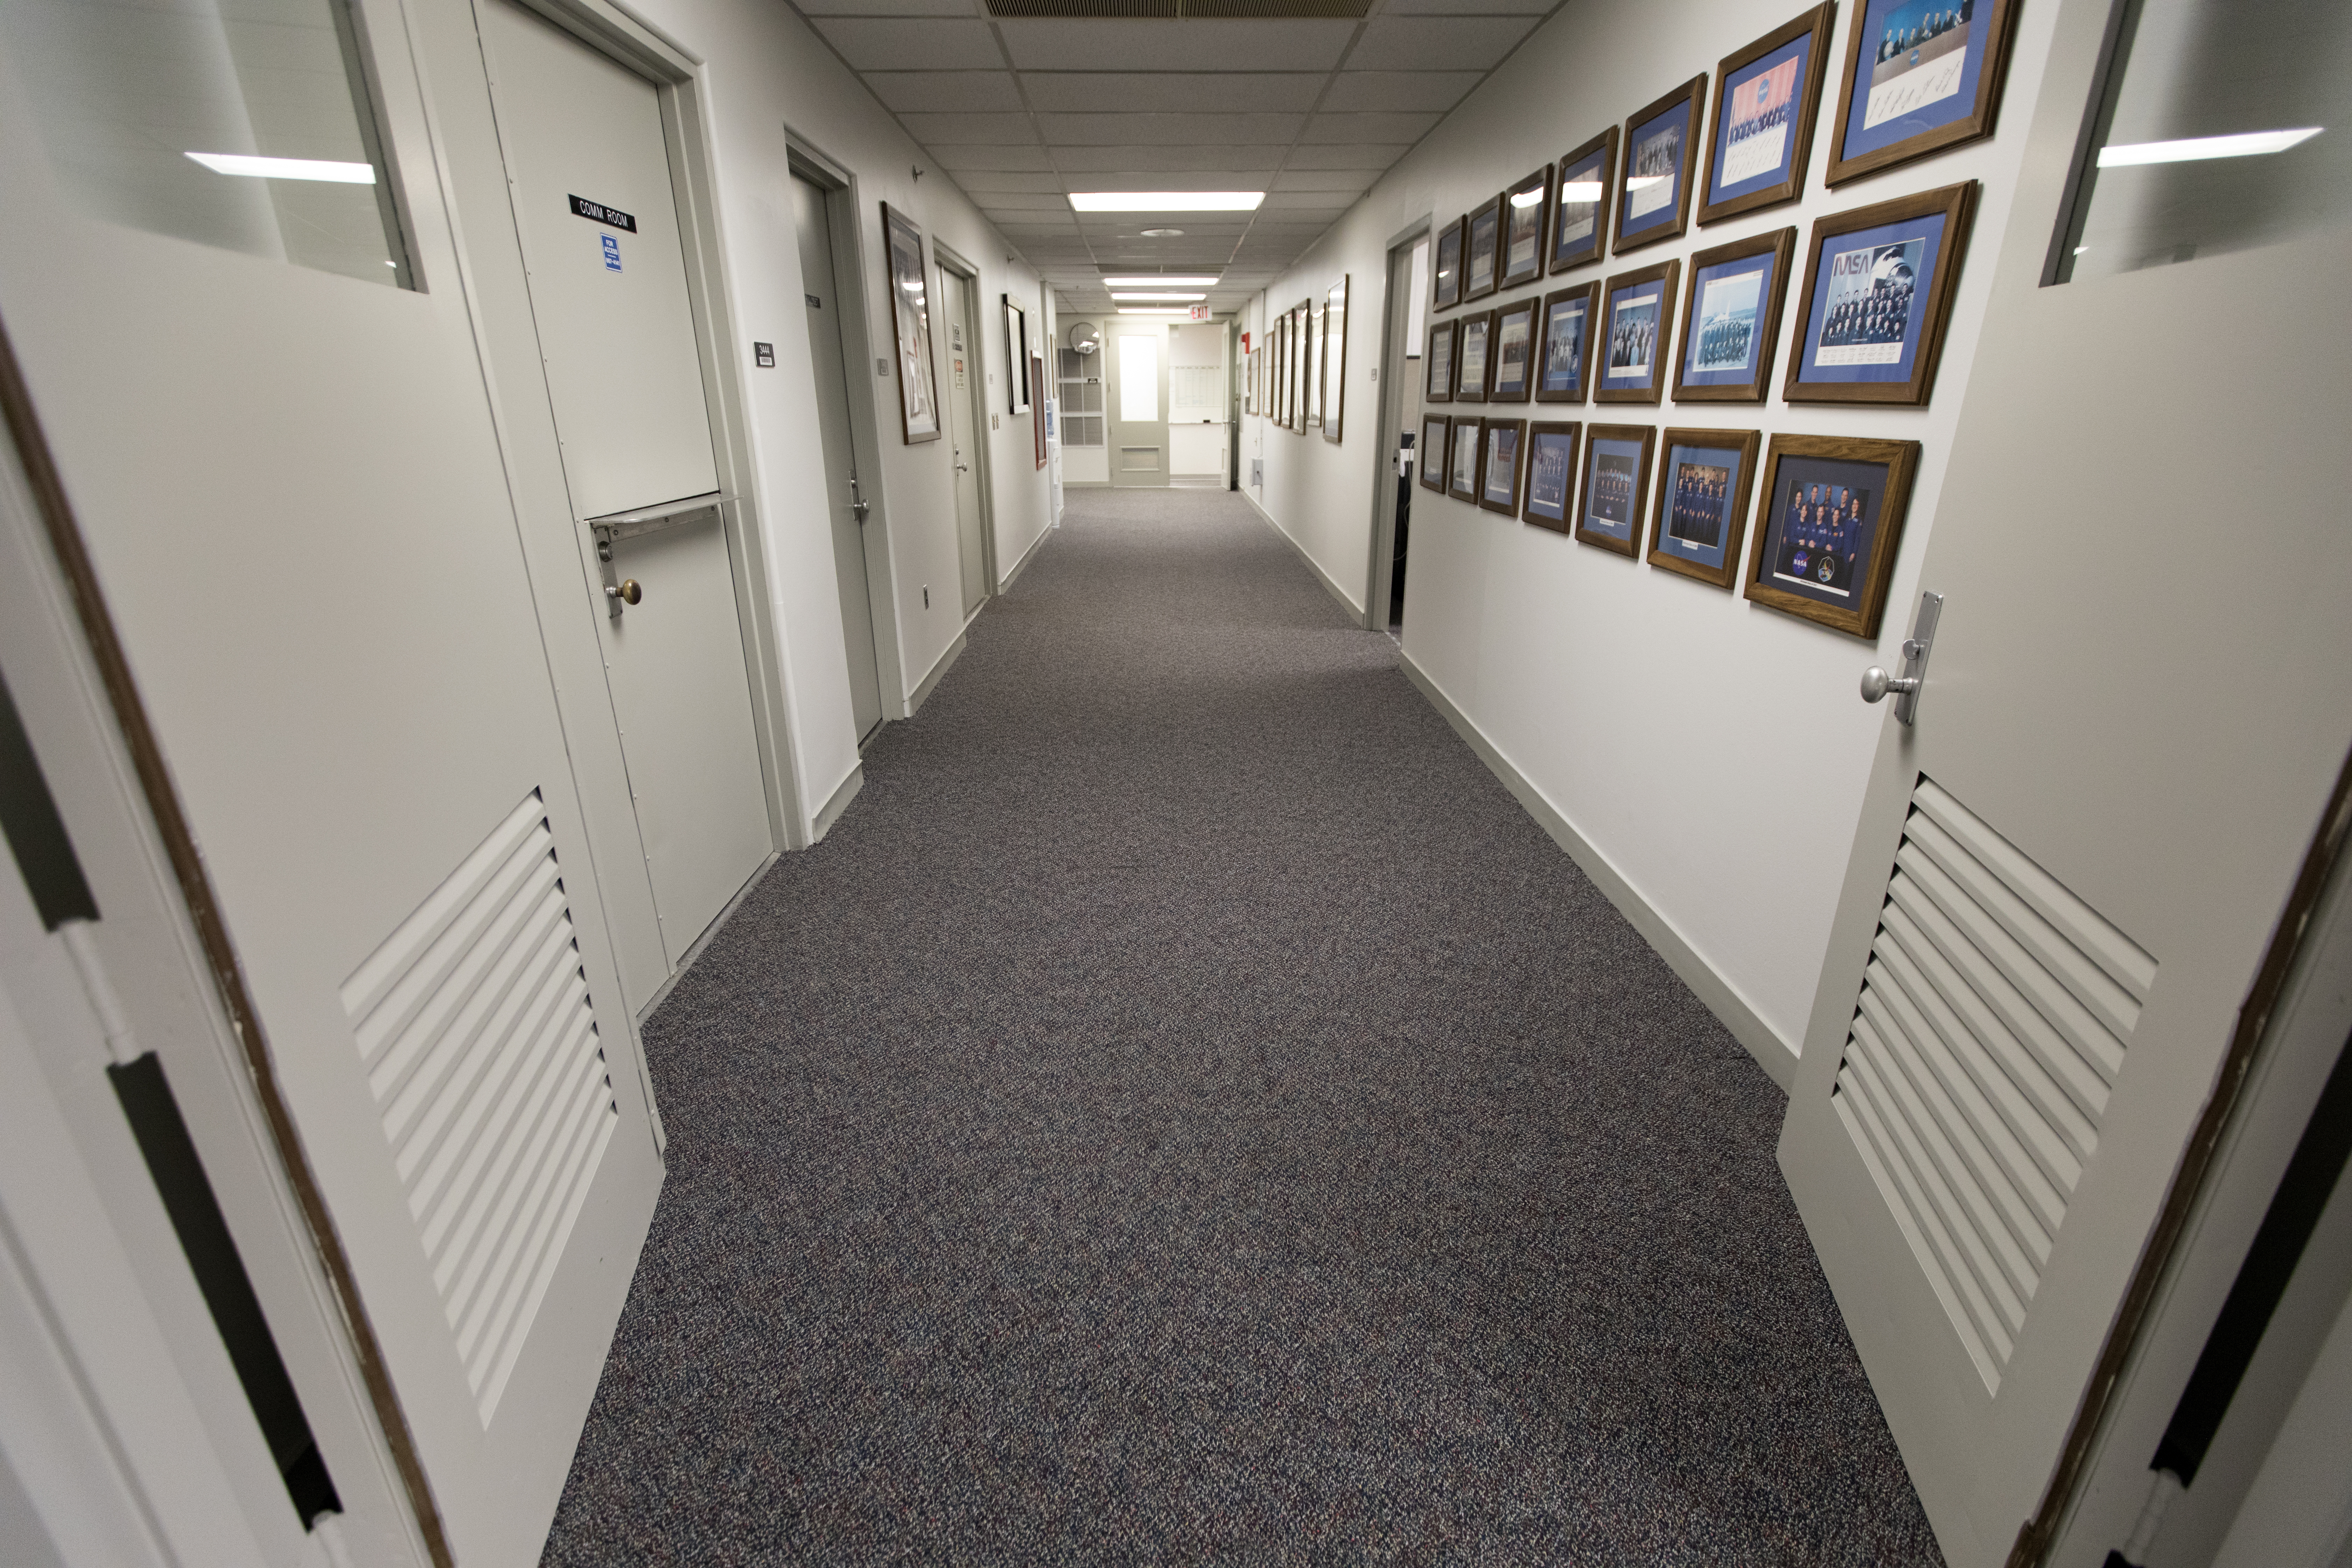 The hallway of the astronaut crew quarters at Kennedy Space Center in Florida